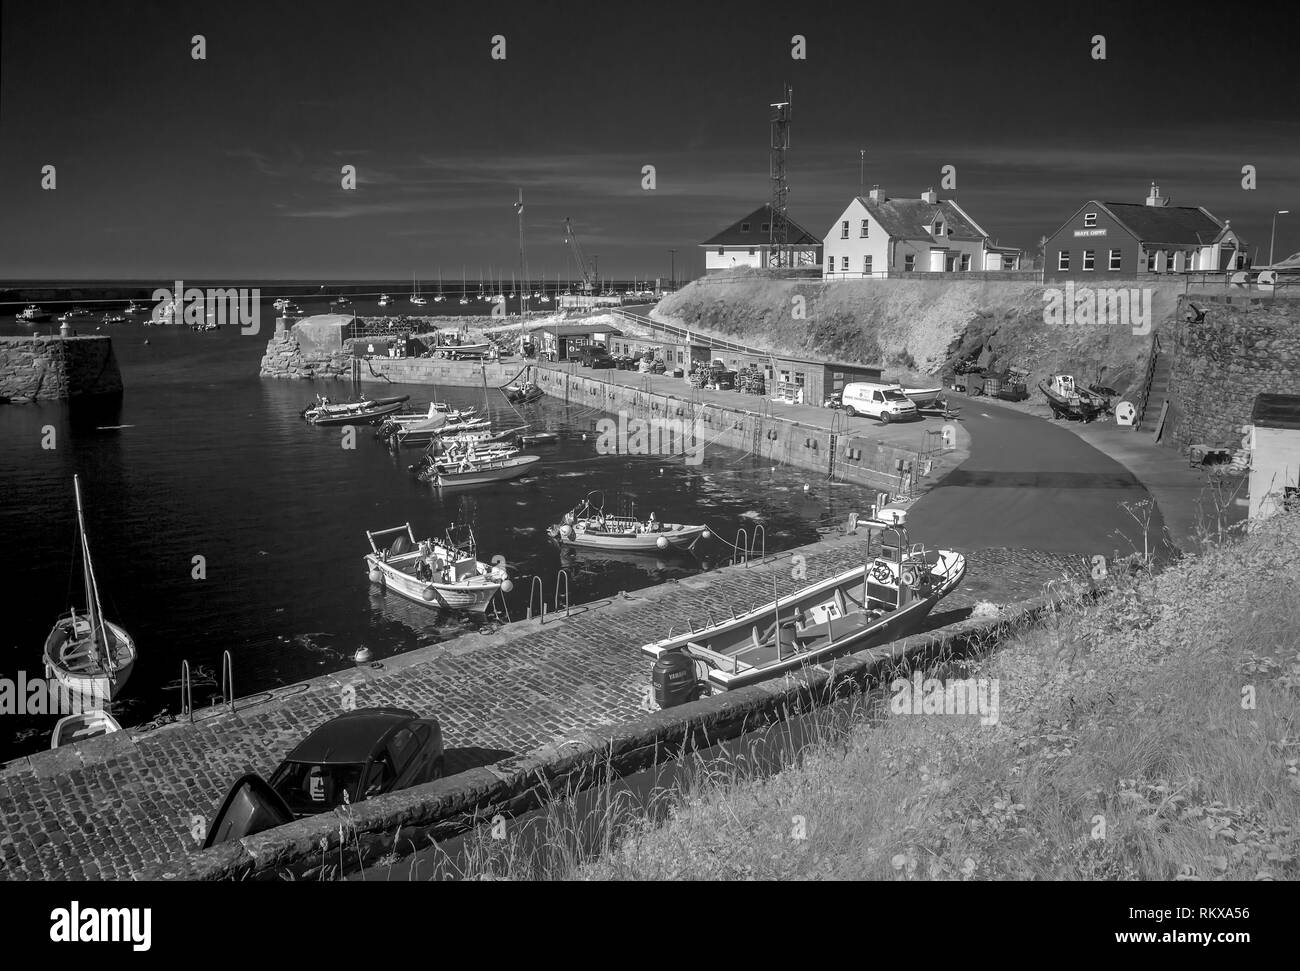 Infrared monochrome image of Braye Harbour on Alderney , Channel Islands. Stock Photo